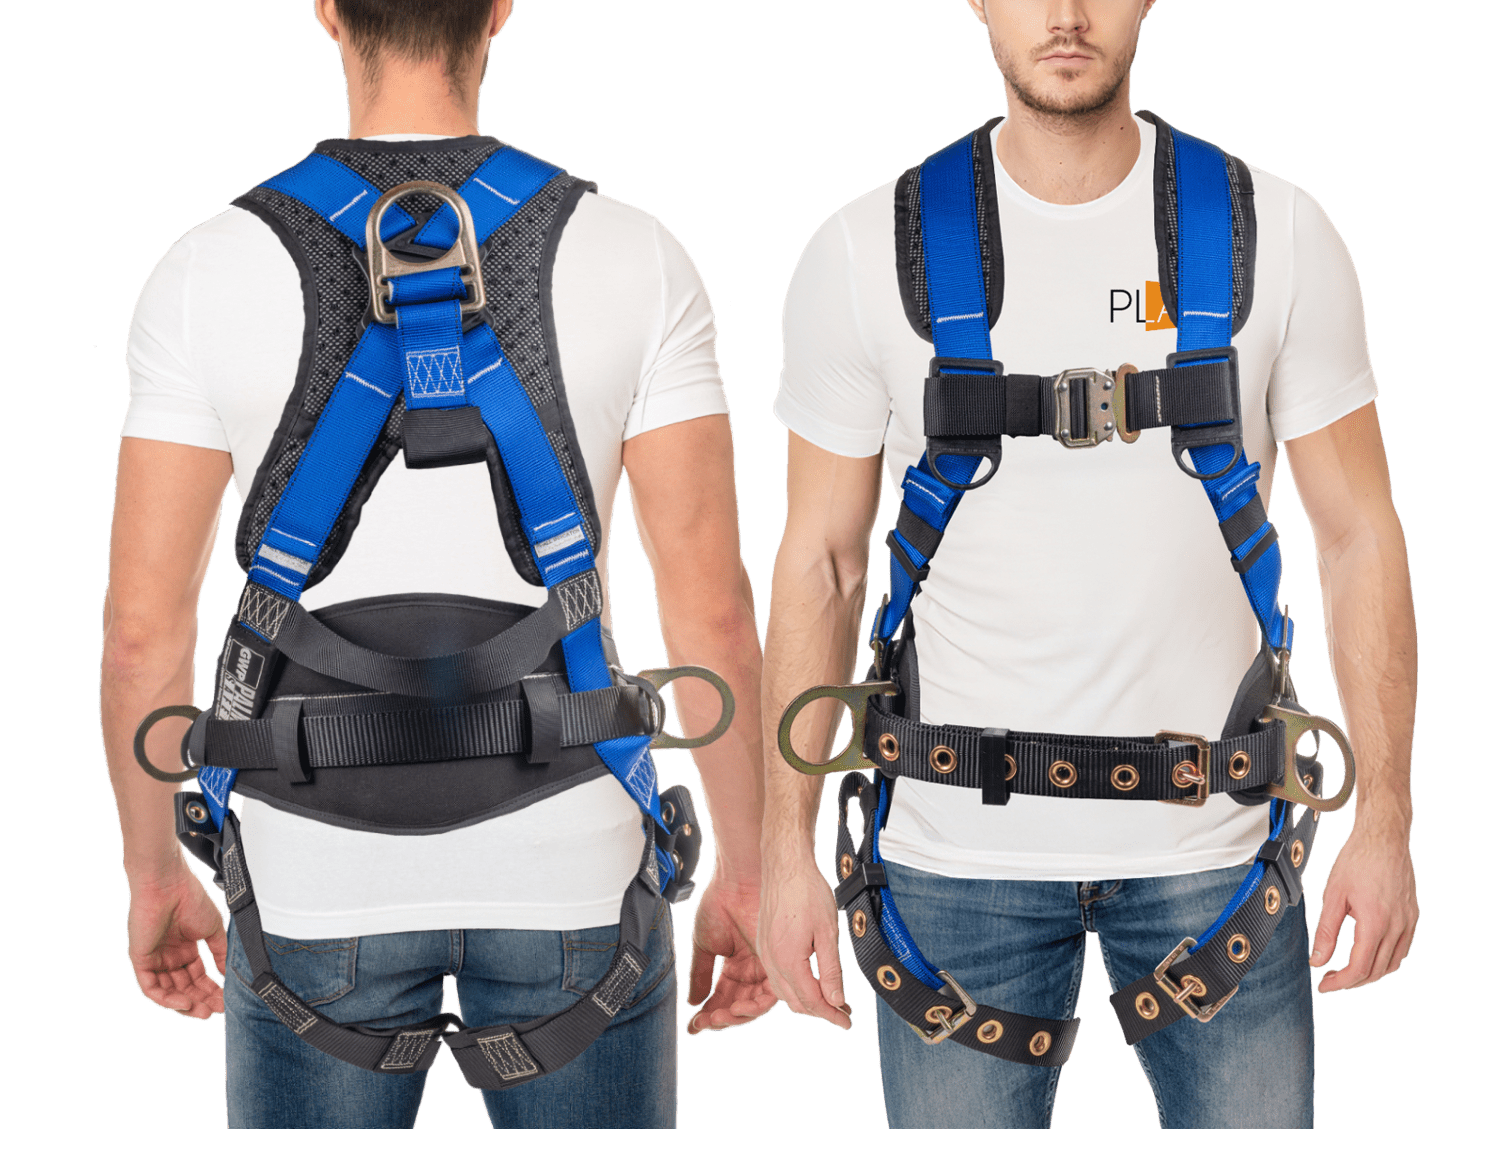 Construction Safety Harness 5 Point, Back Padded, QCB, Grommet Legs - Defender Safety